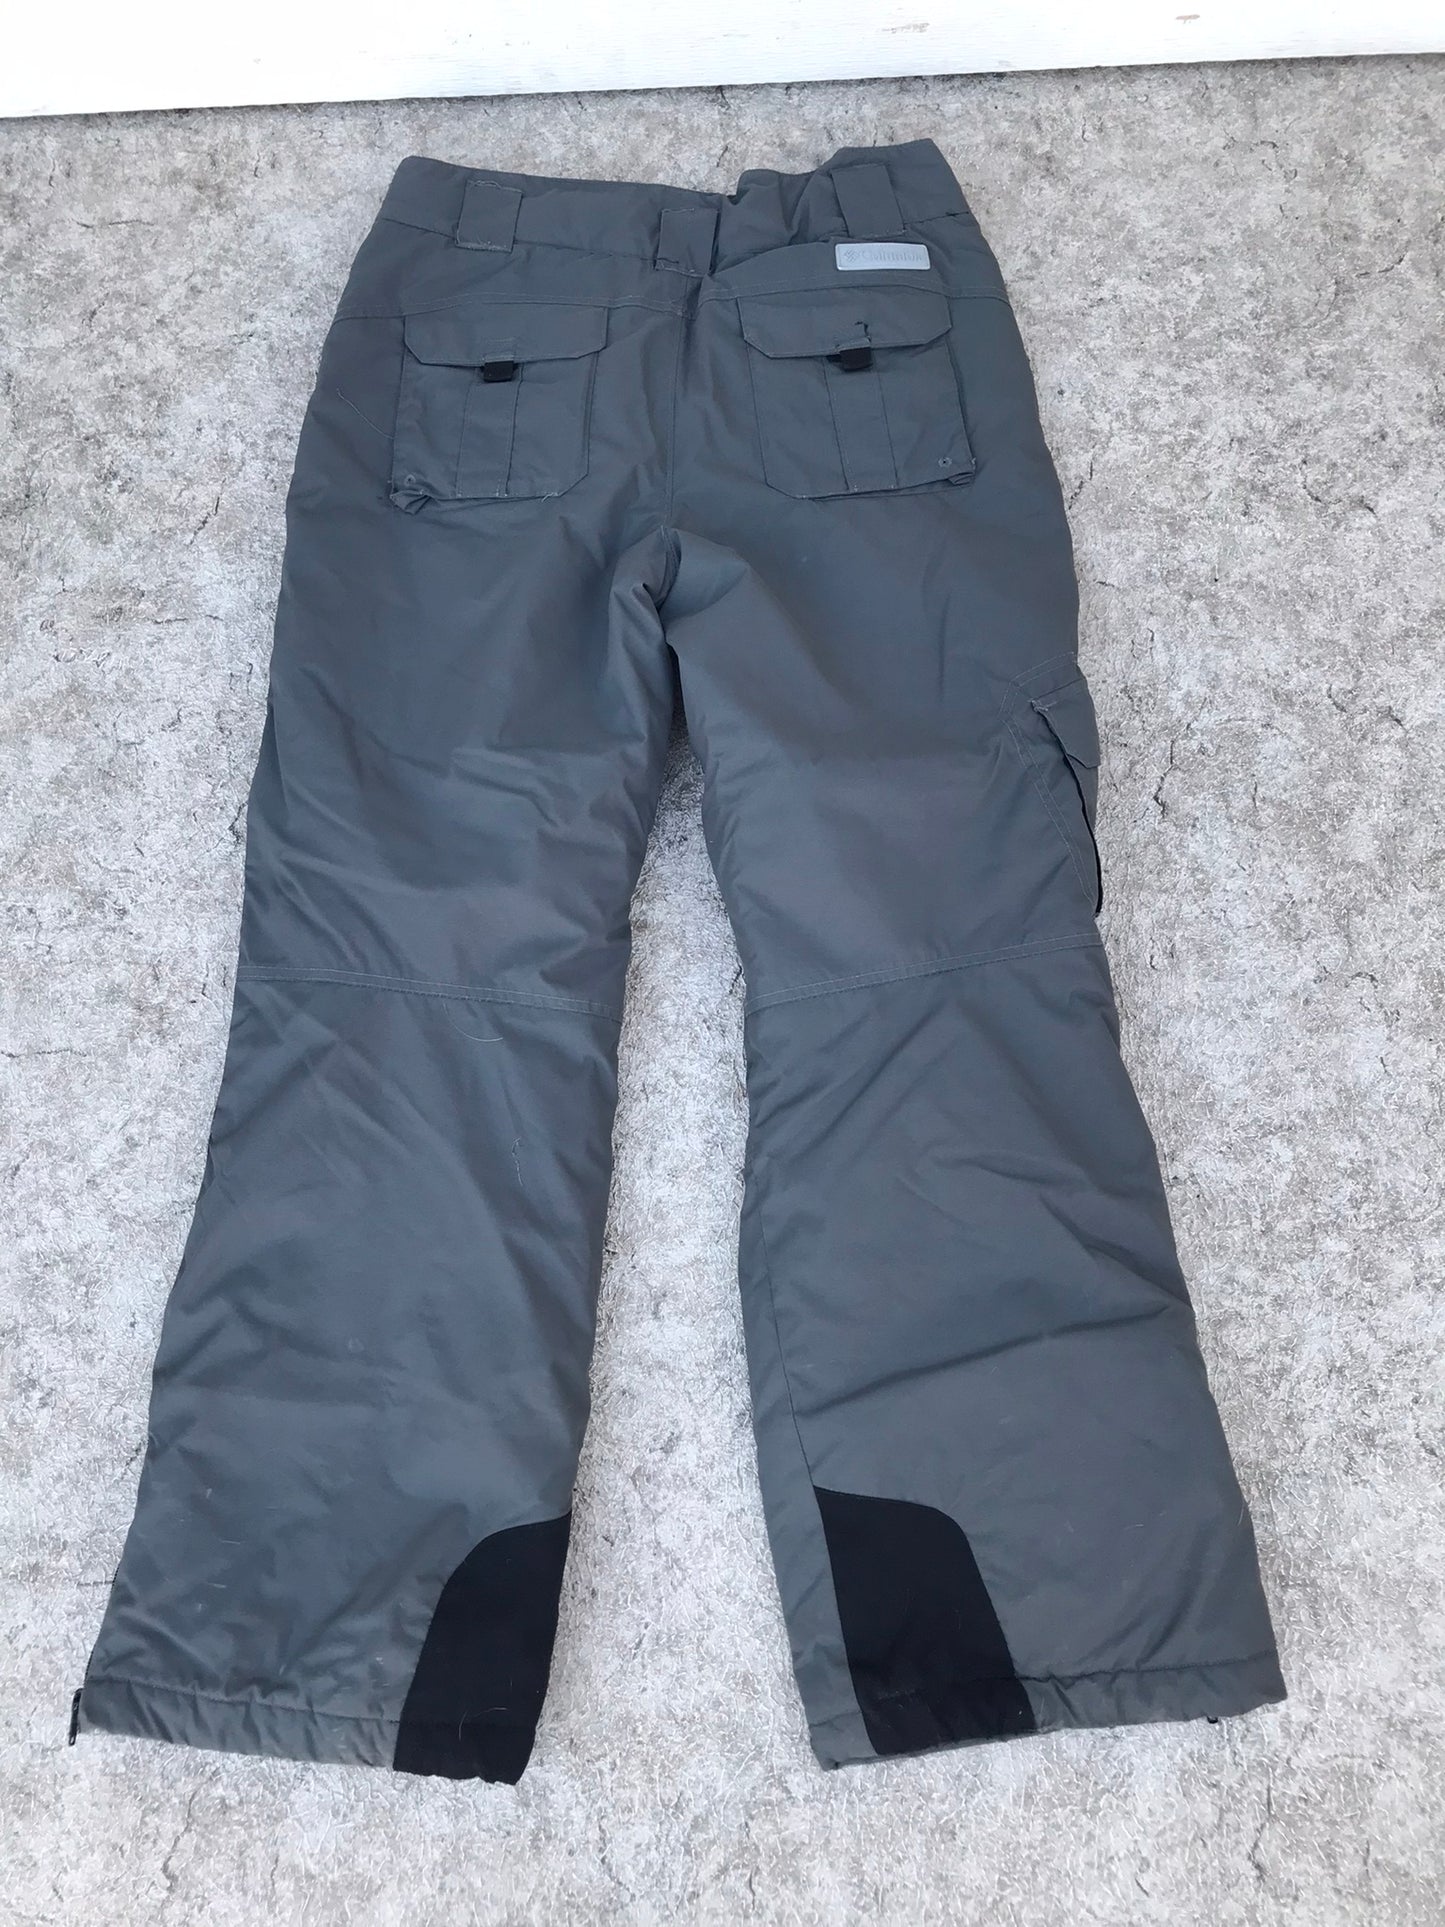 Snow Pants Child Size 18-20 or Men's Small Columbia Smoke Grey Minor Wear on Cuffs